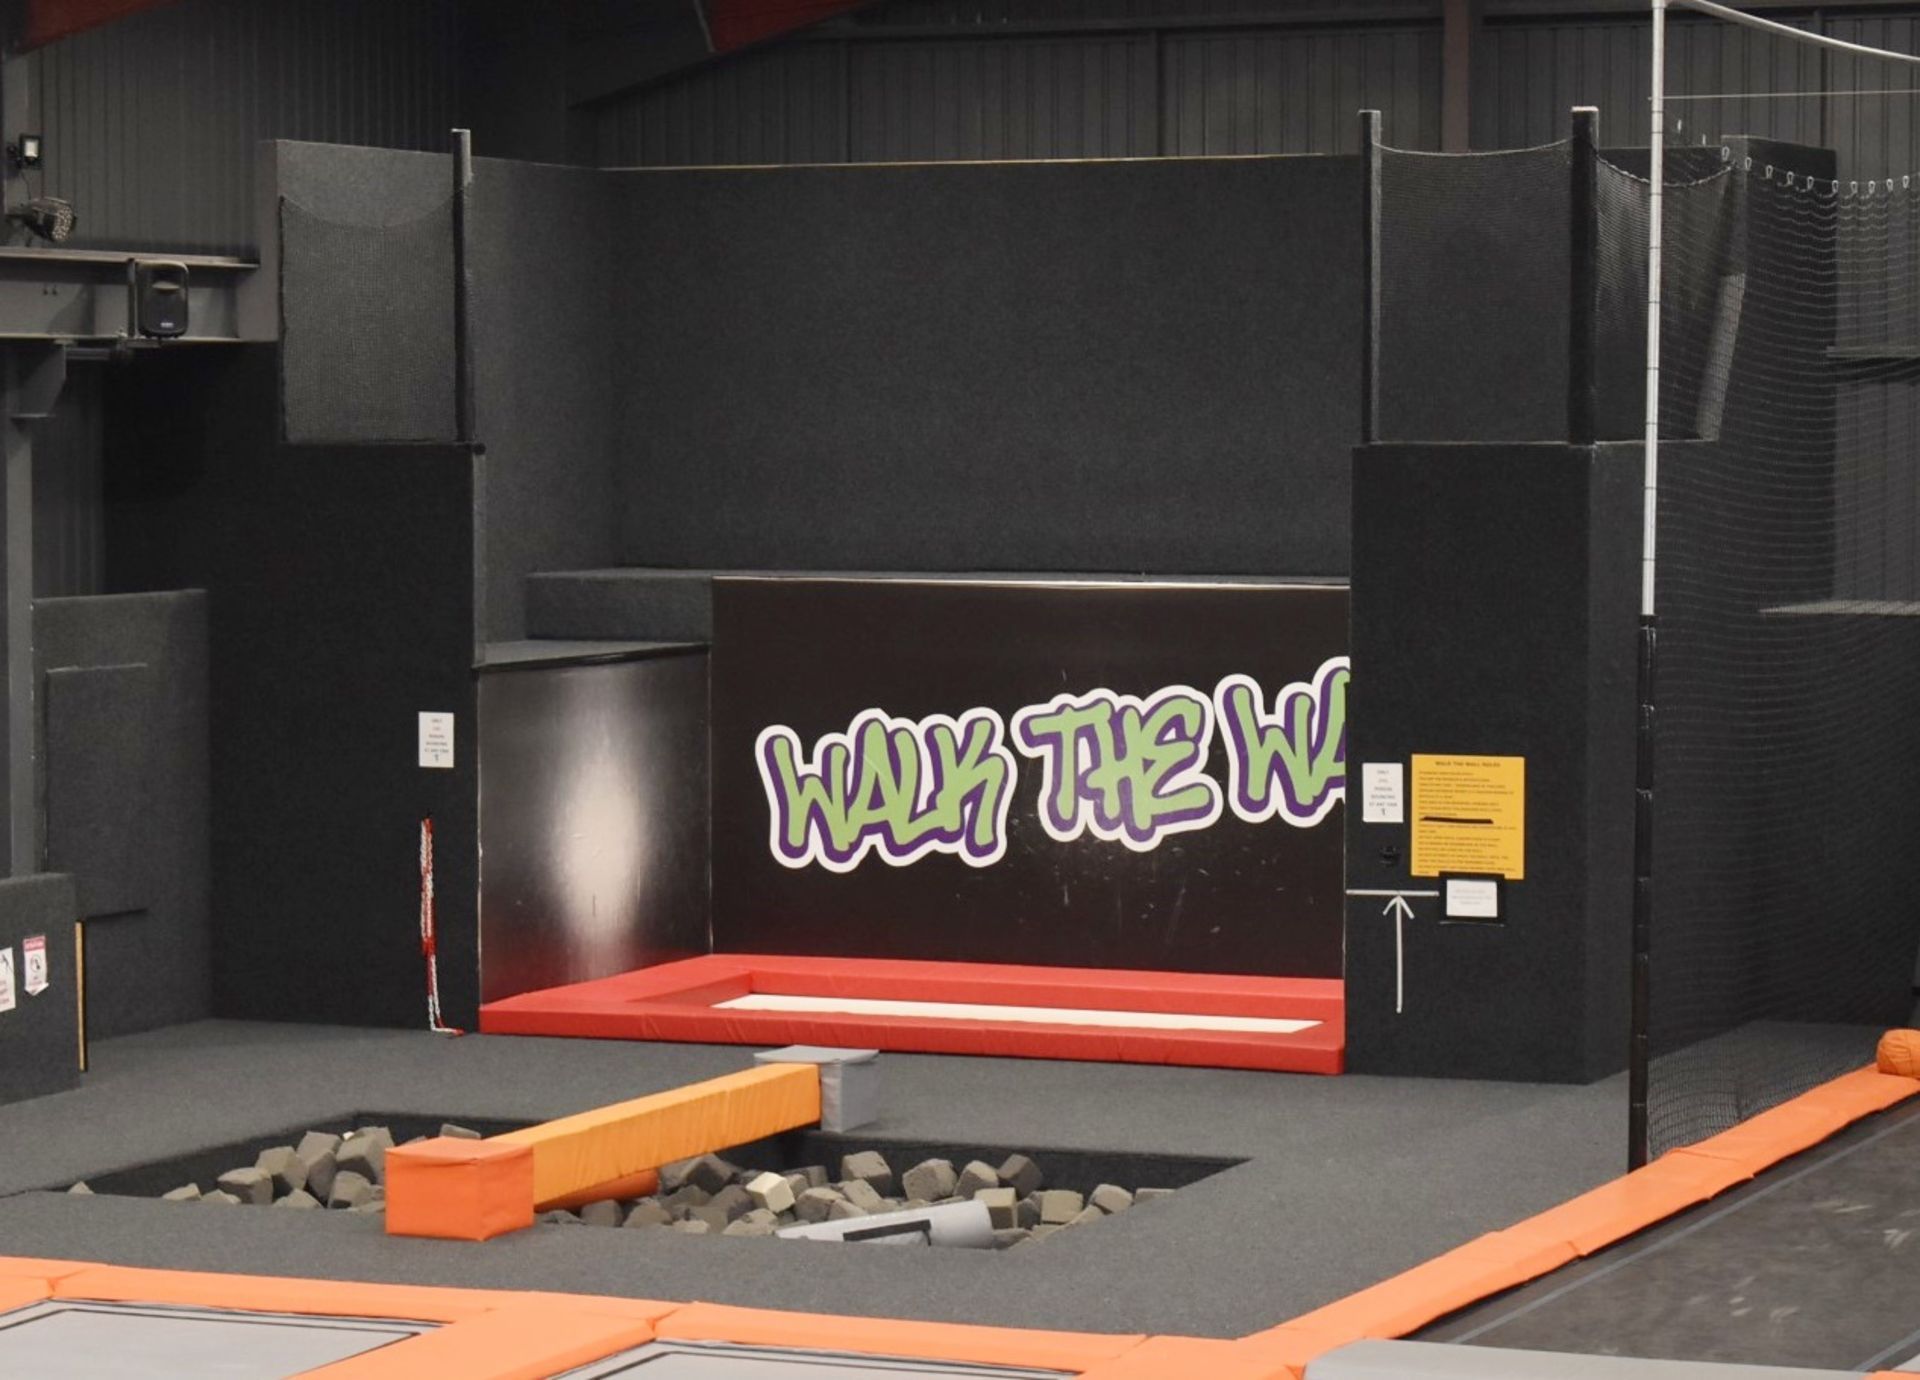 1 x Large Trampoline Park - Disassembled - Includes Dodgeball Arena And Jump Tower - CL766  - - Image 64 of 99